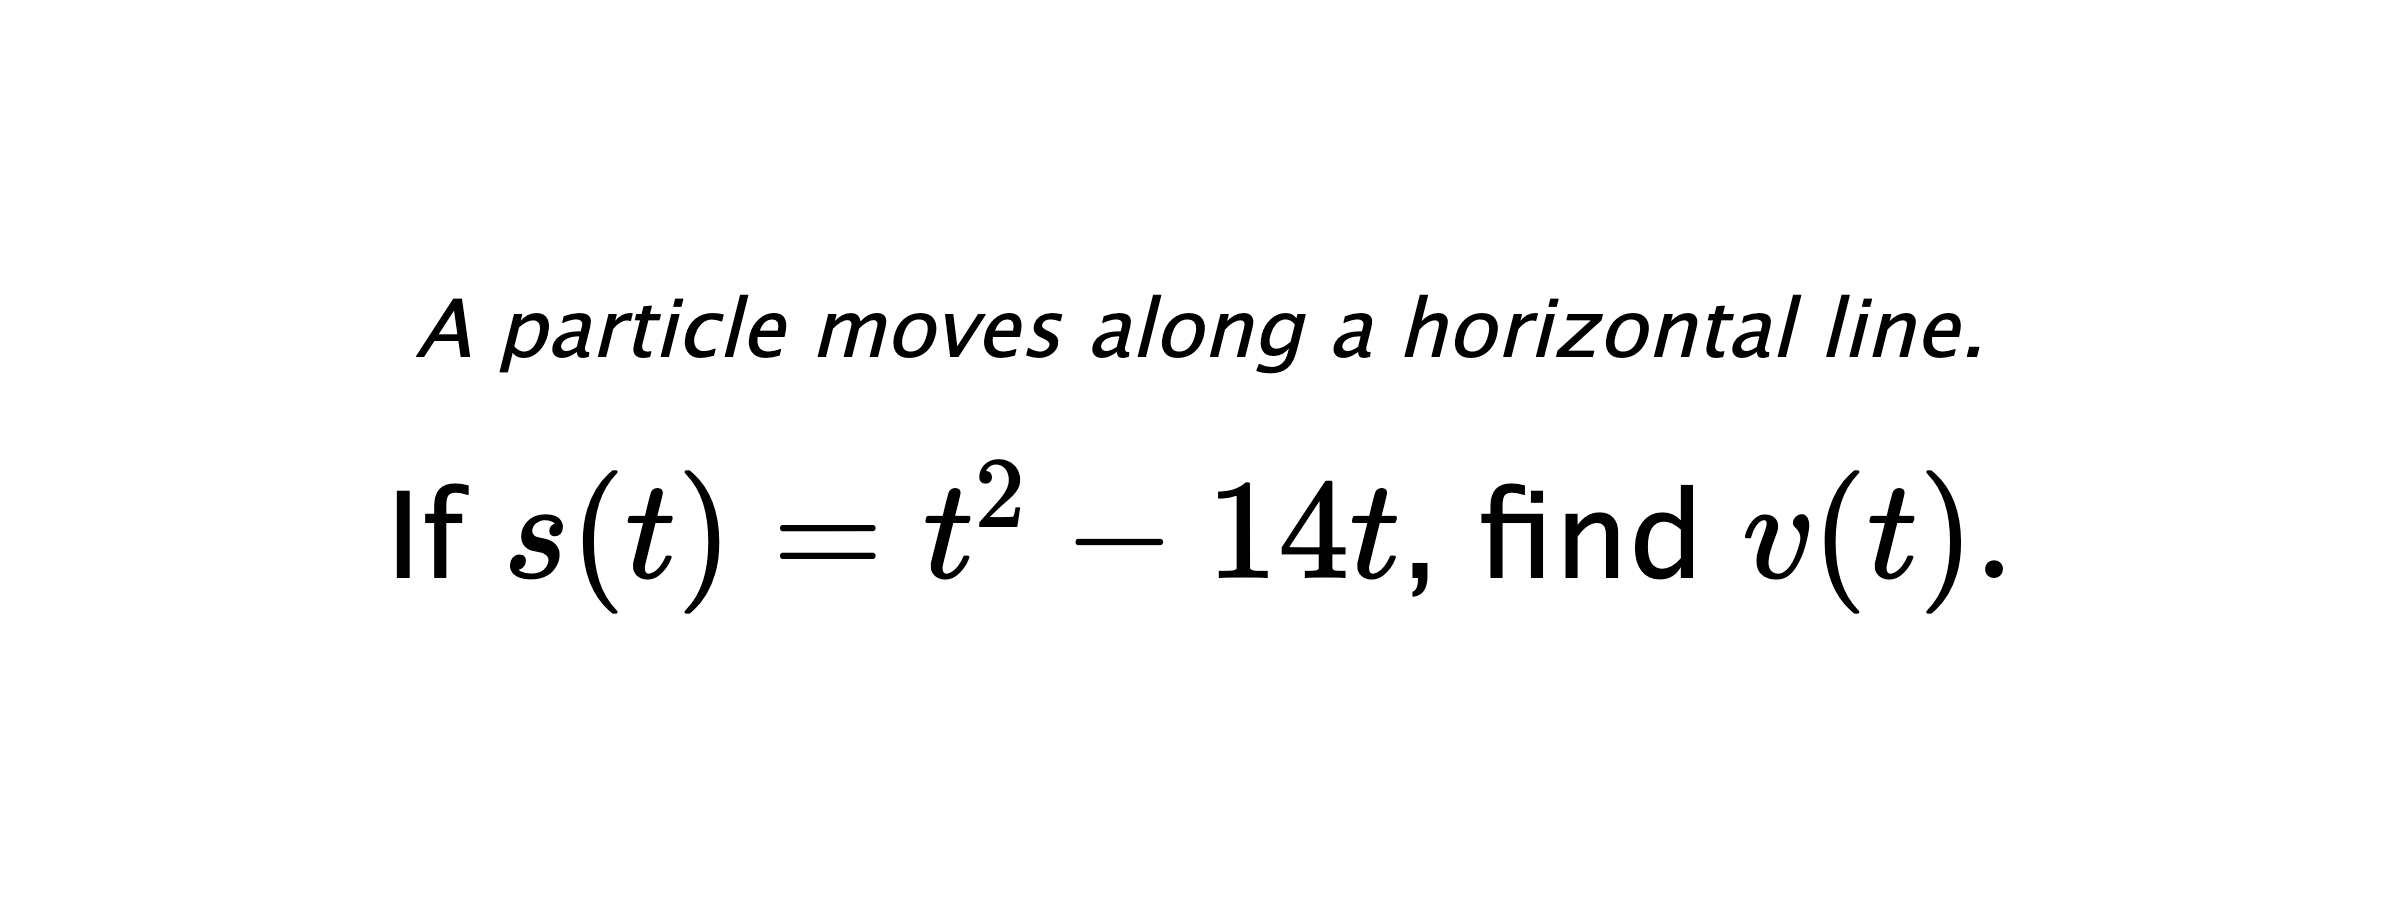 A particle moves along a horizontal line. If $ s(t)=t^2-14t $, find $ v(t). $